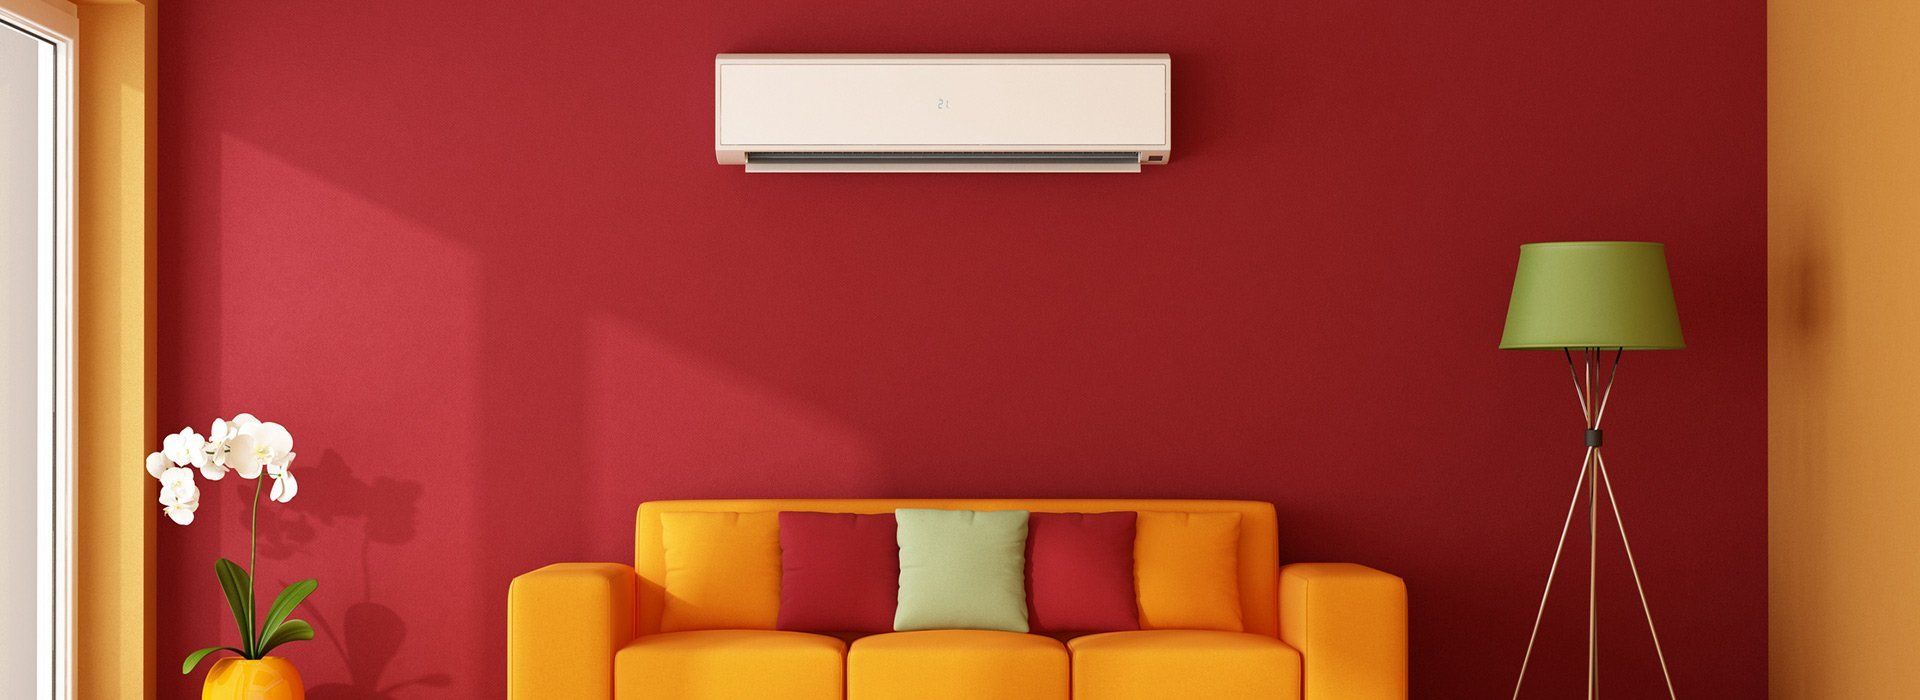 split n stawell heating and colling air condition in living room